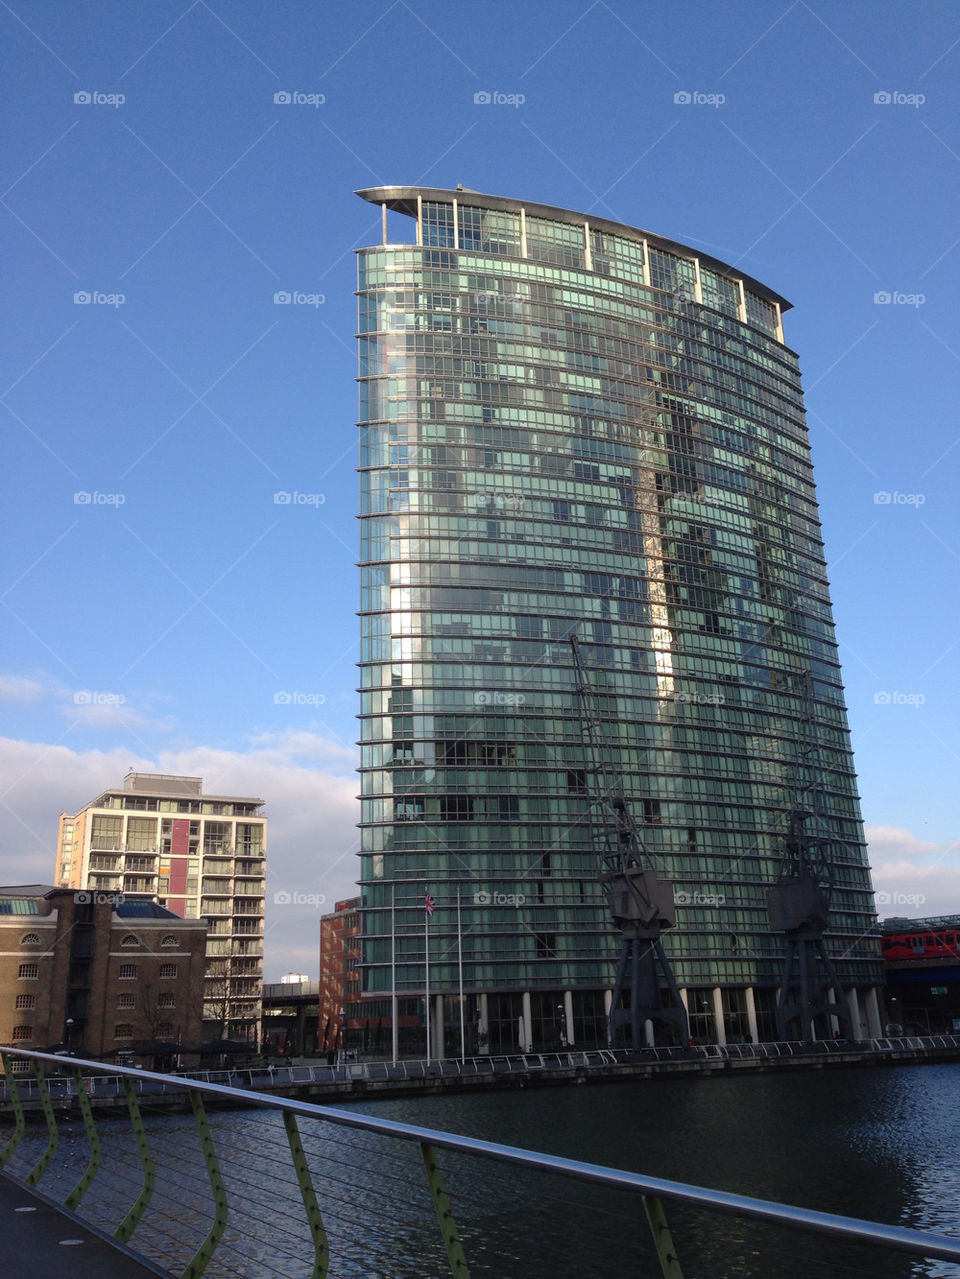 Picture Of Marriott West India Quay.